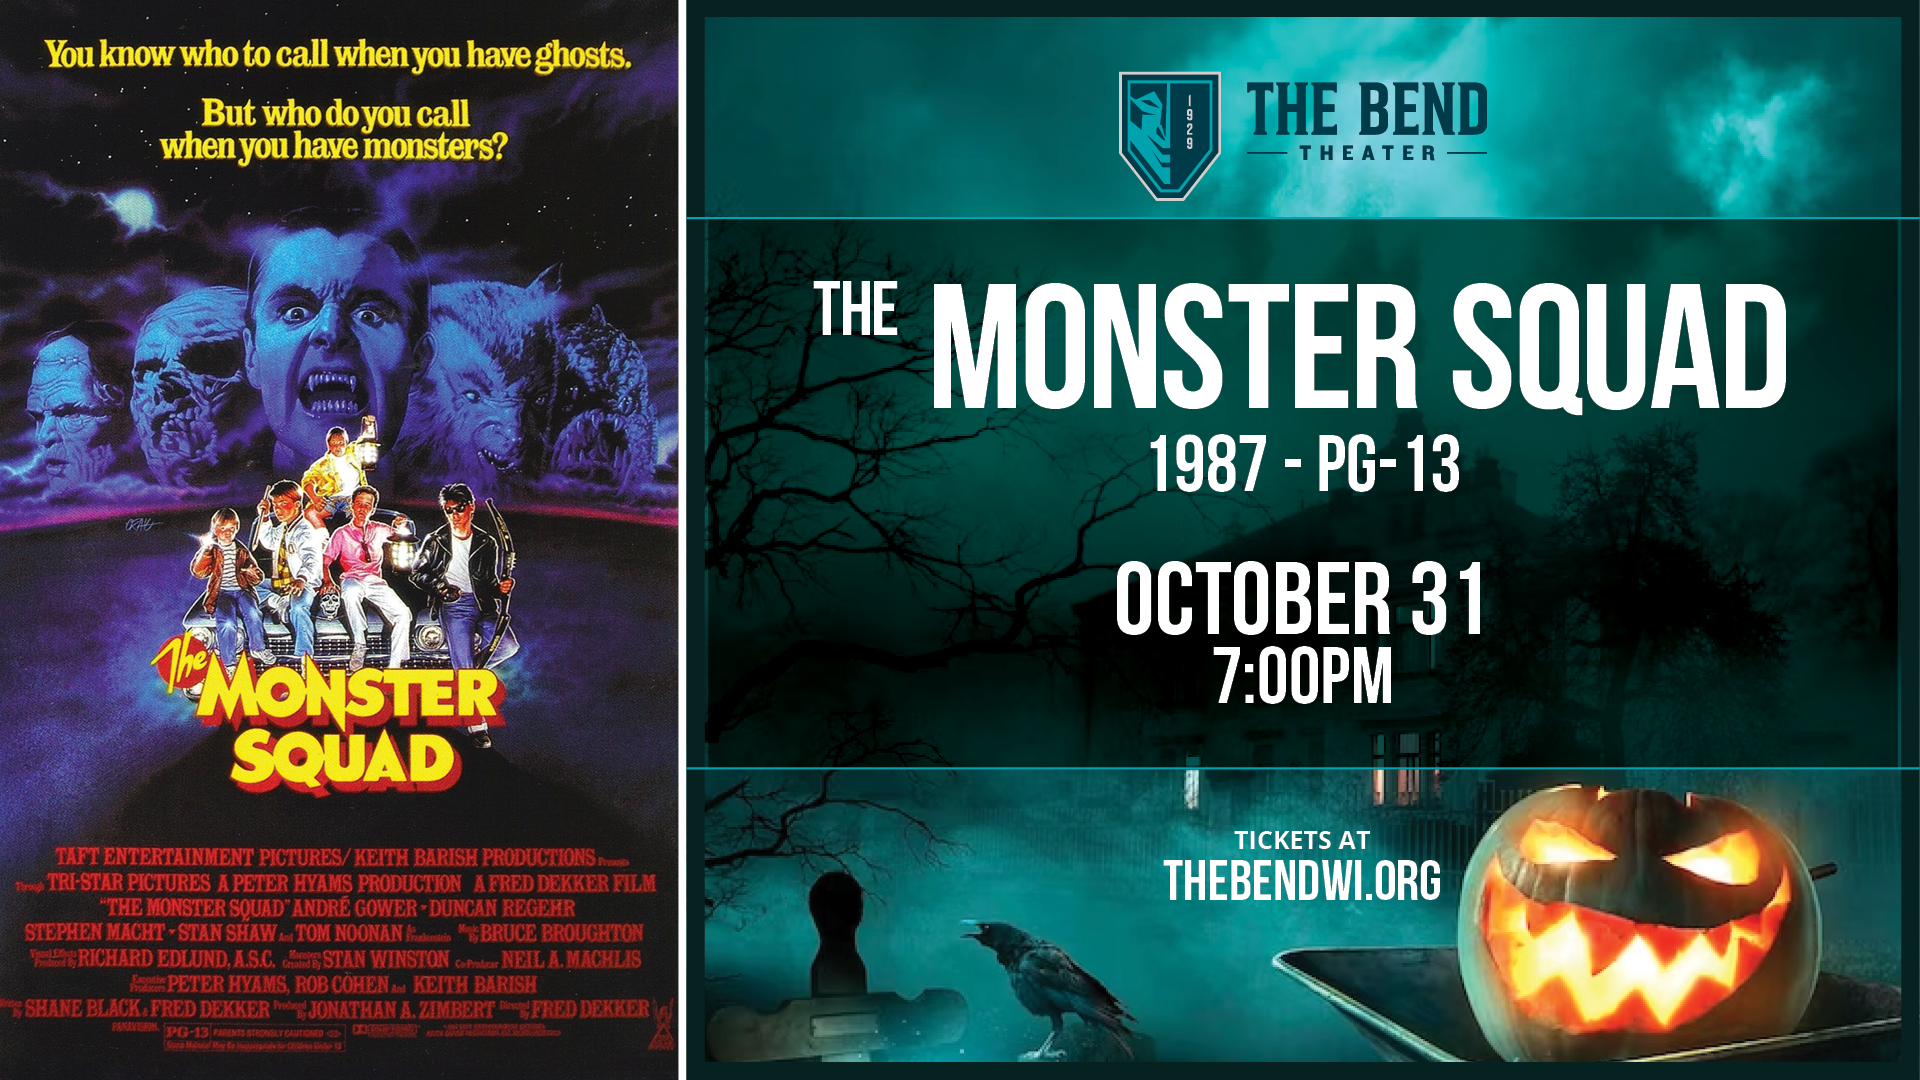 Family-Friendly Spooky Films at The Bend: The Monster Squad (1987 - PG-13)